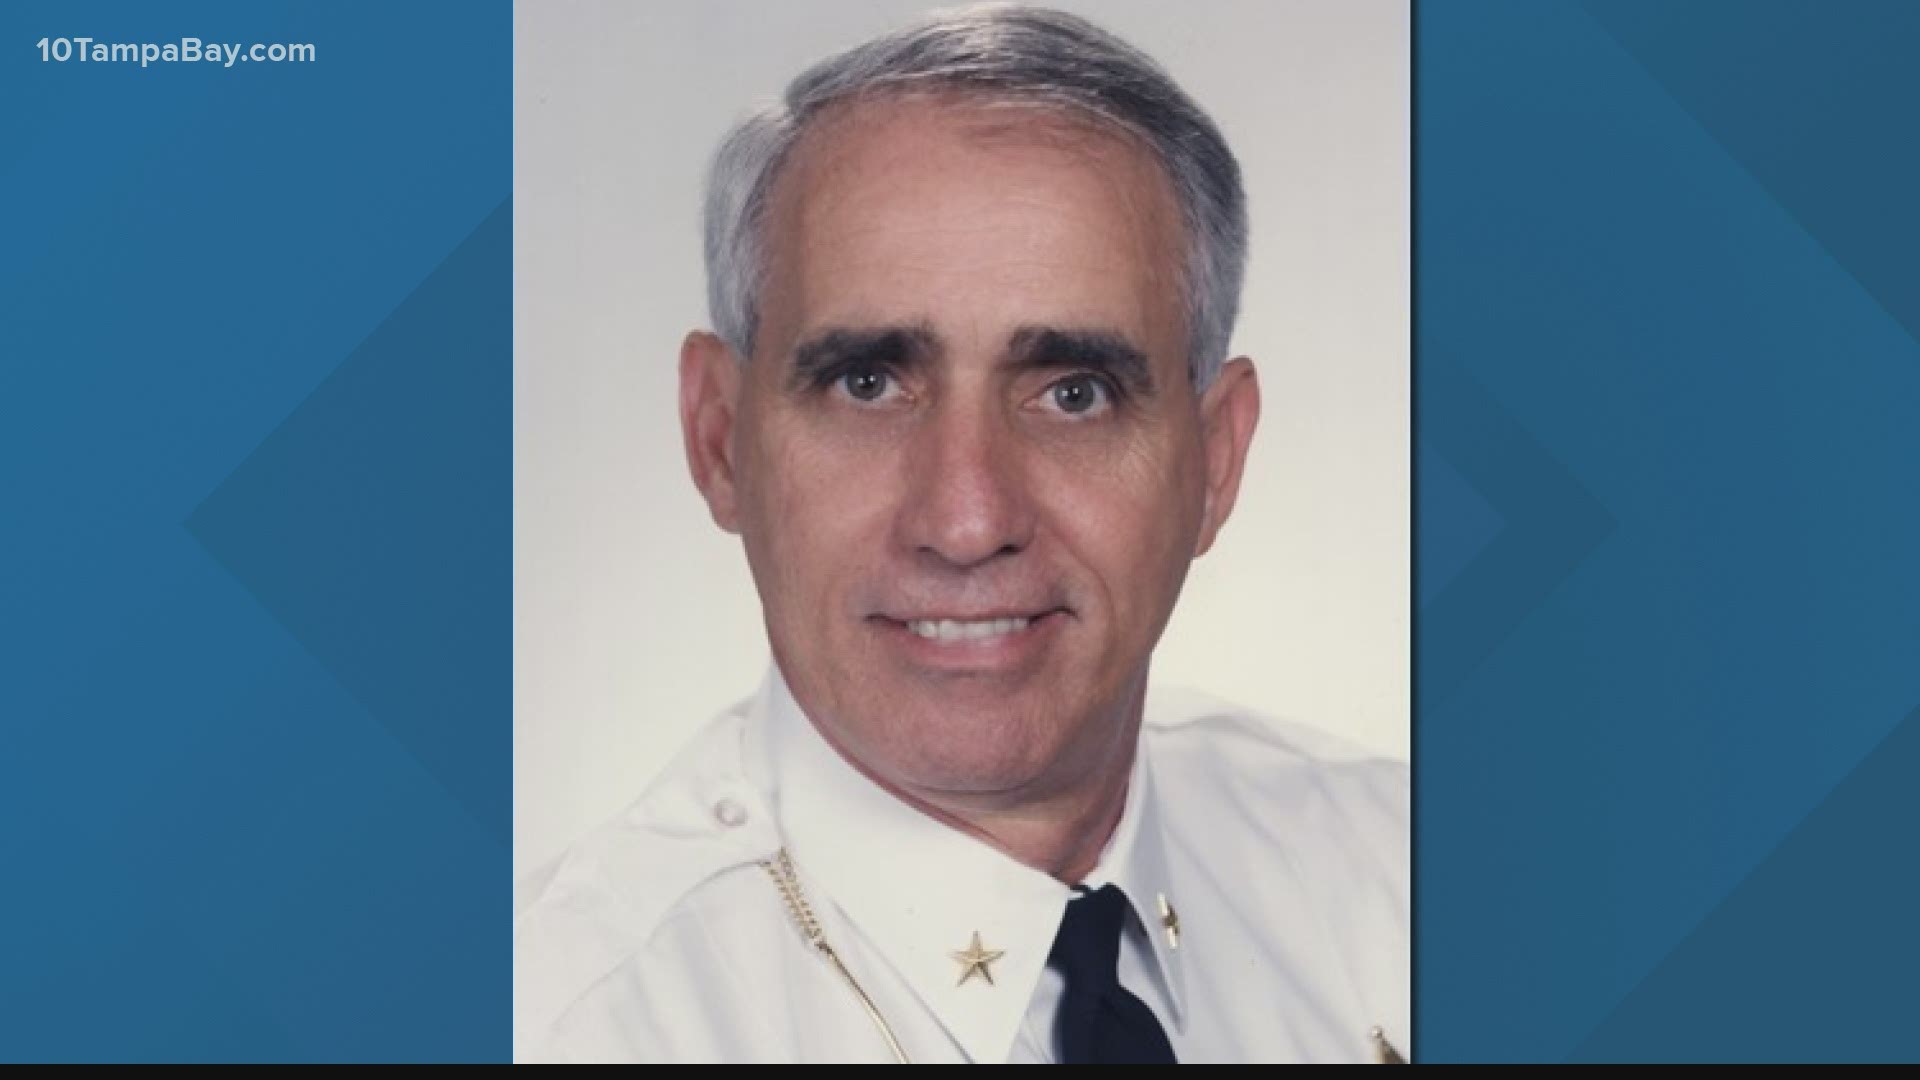 He served as sheriff from 1992 to 2004.